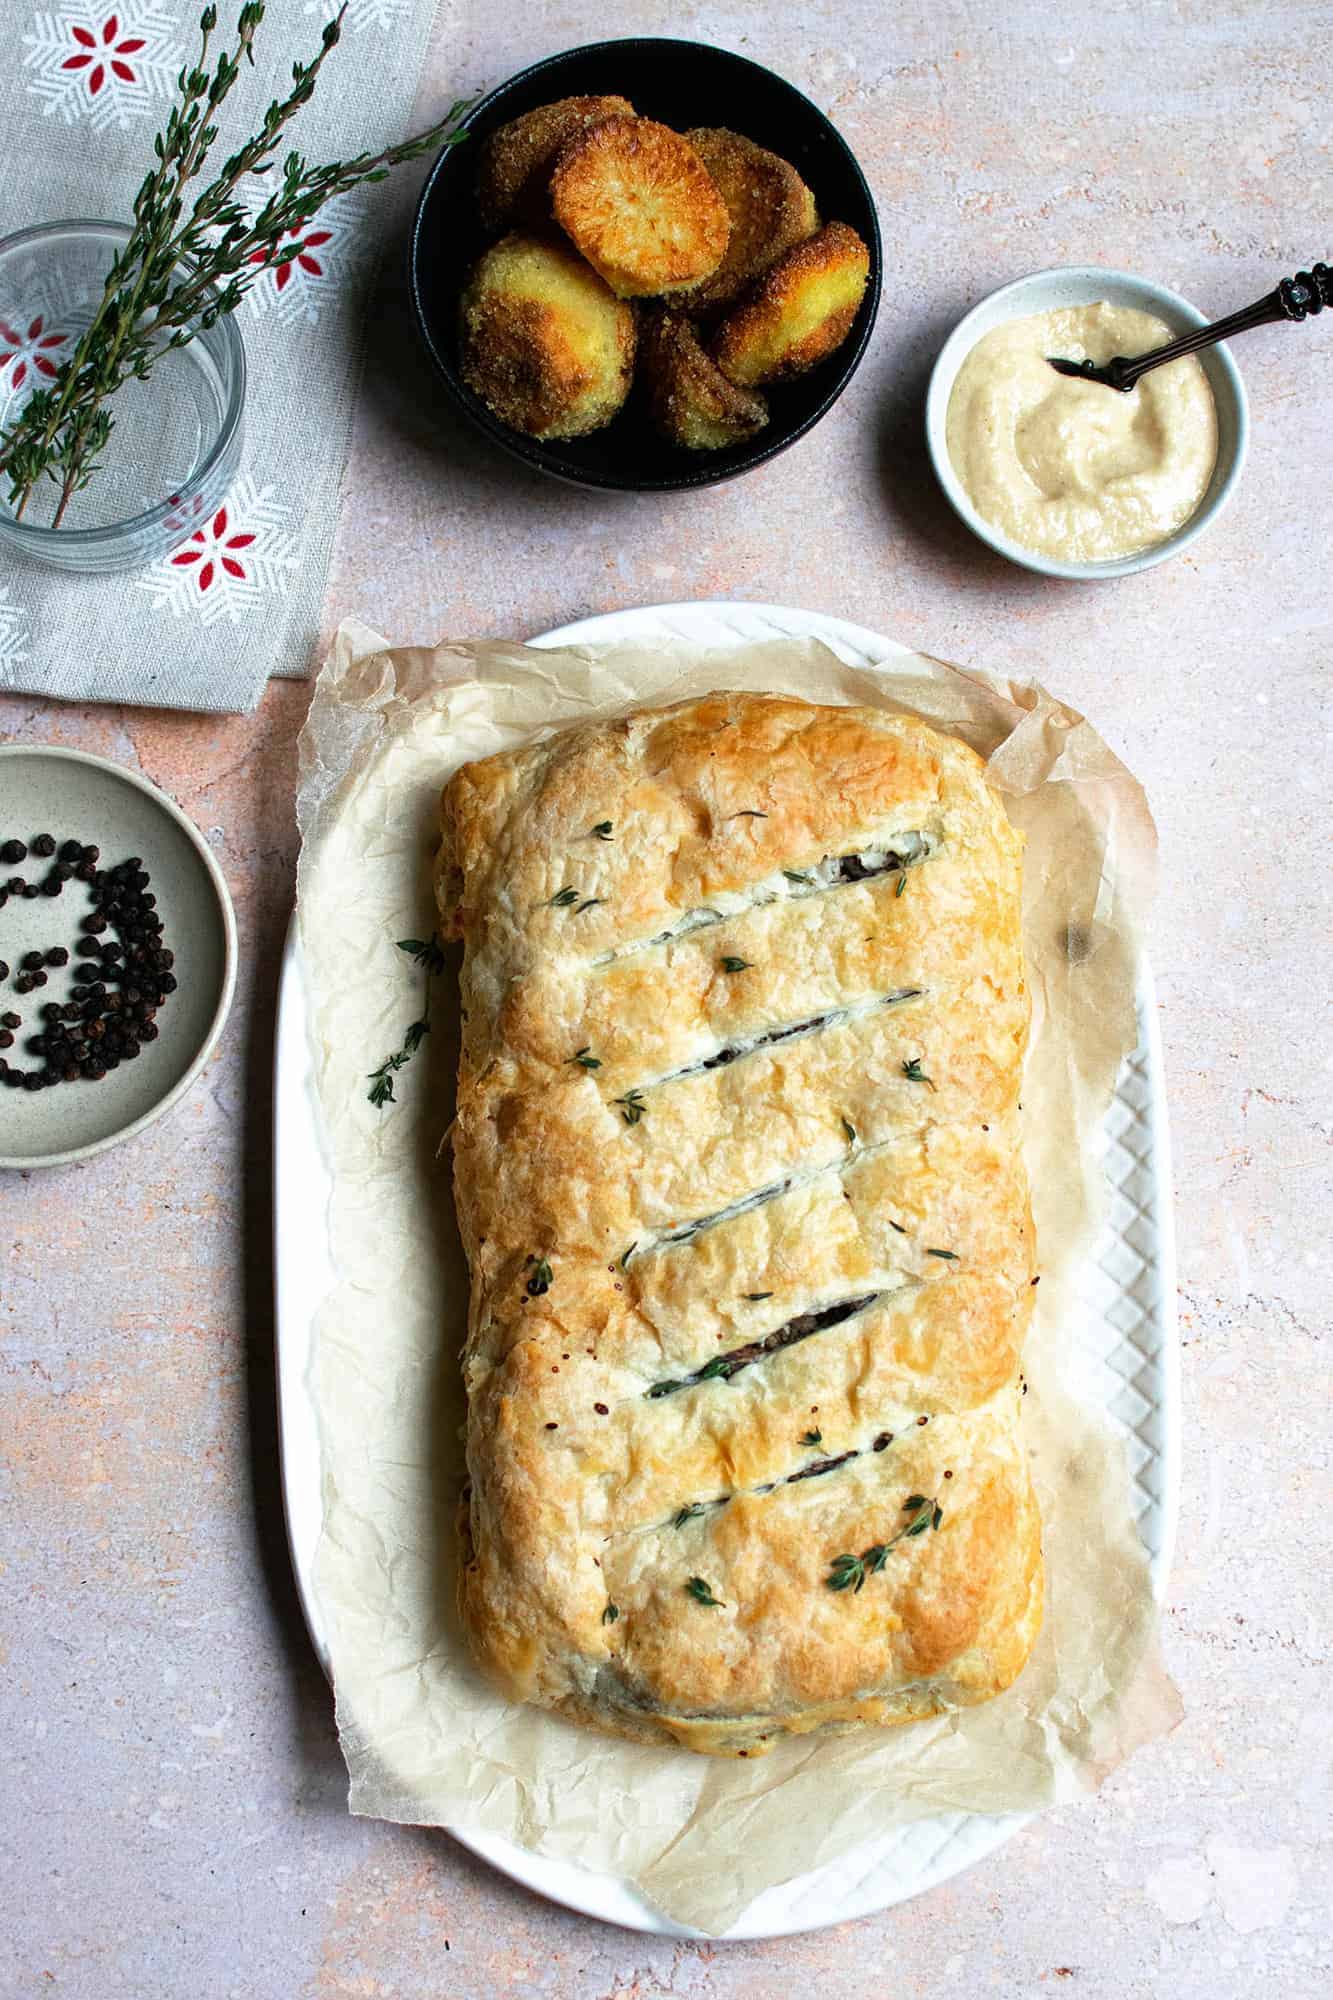 Mushroom wellington on a platter with pinch bowls around the edge